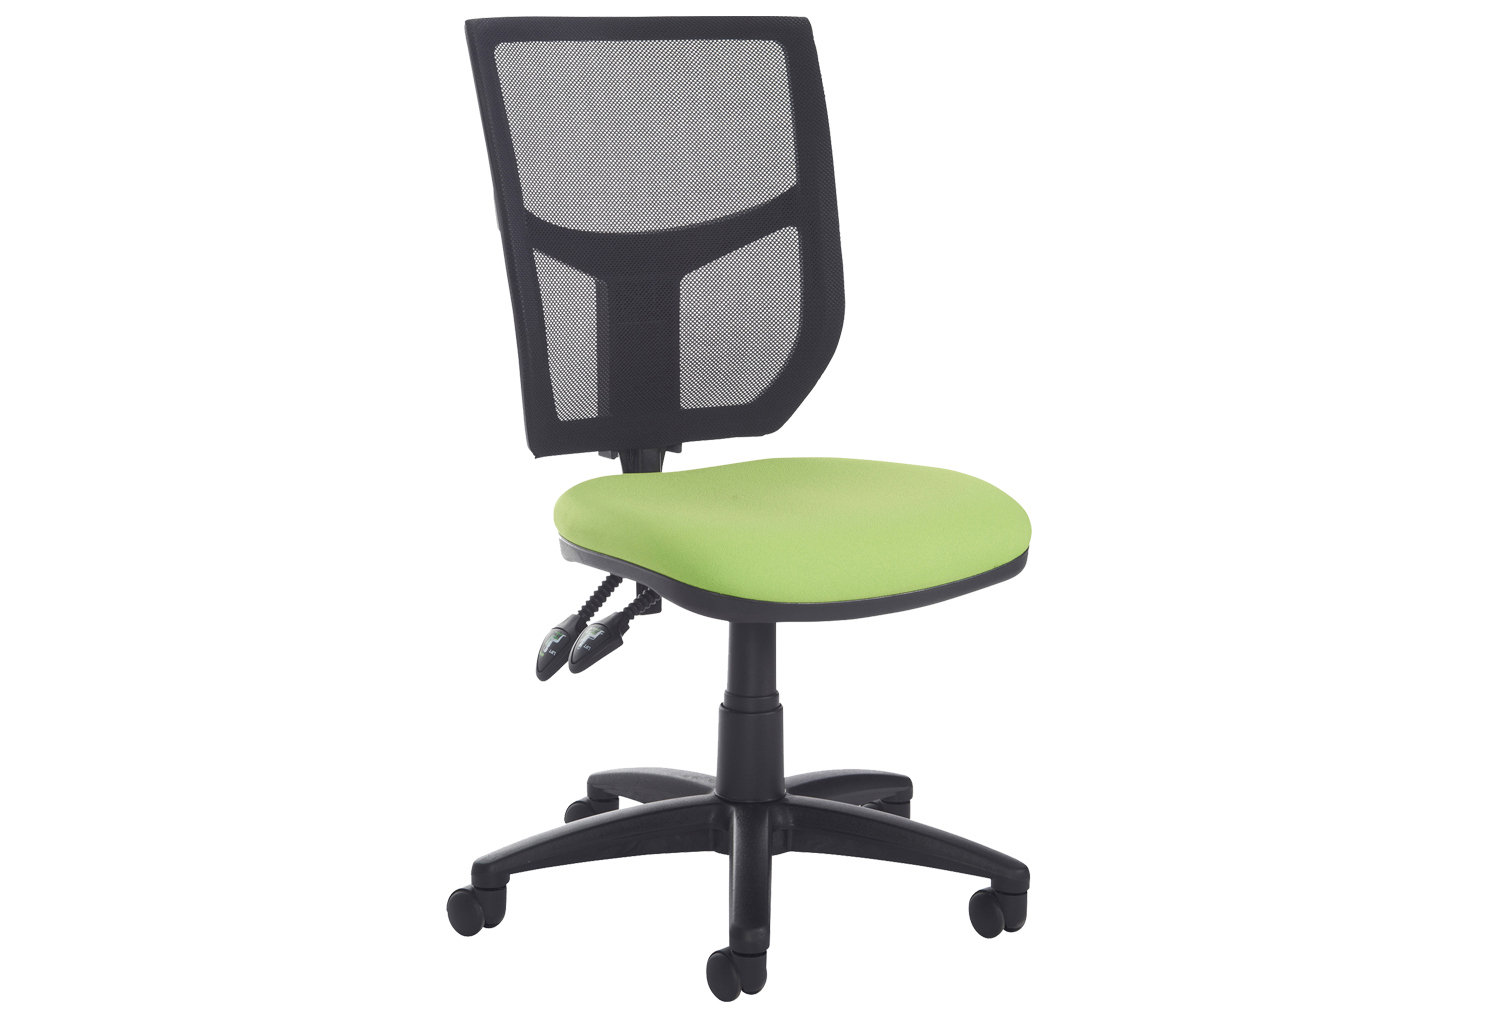 Gordy 2 Lever High Mesh Back Operator Office Chair No Arms, Value